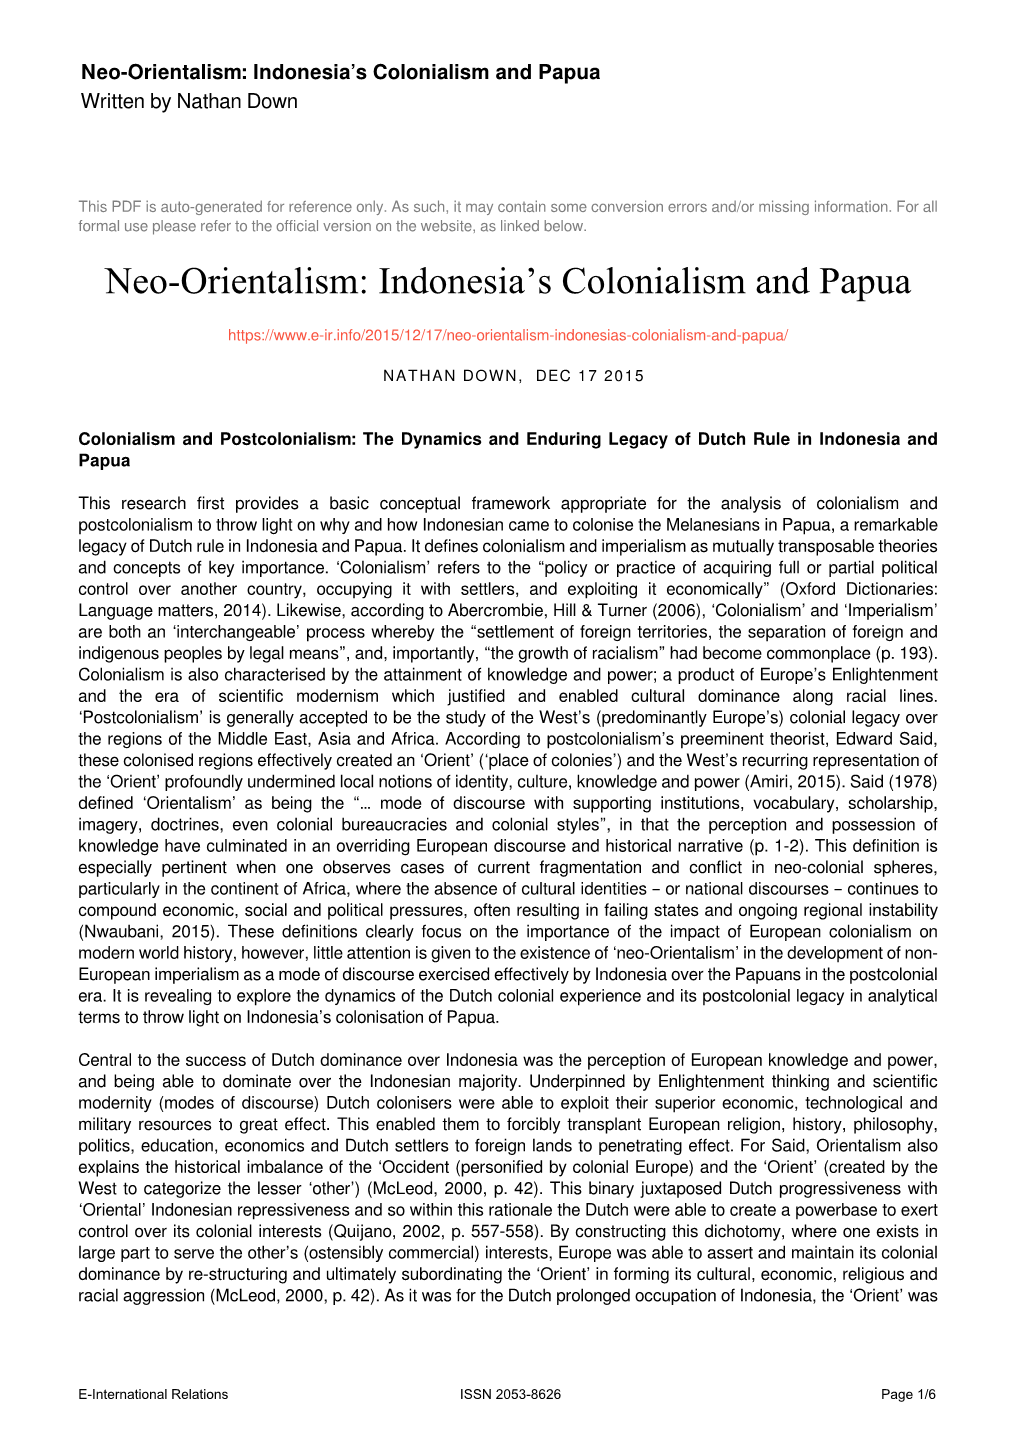 Neo-Orientalism: Indonesia's Colonialism and Papua